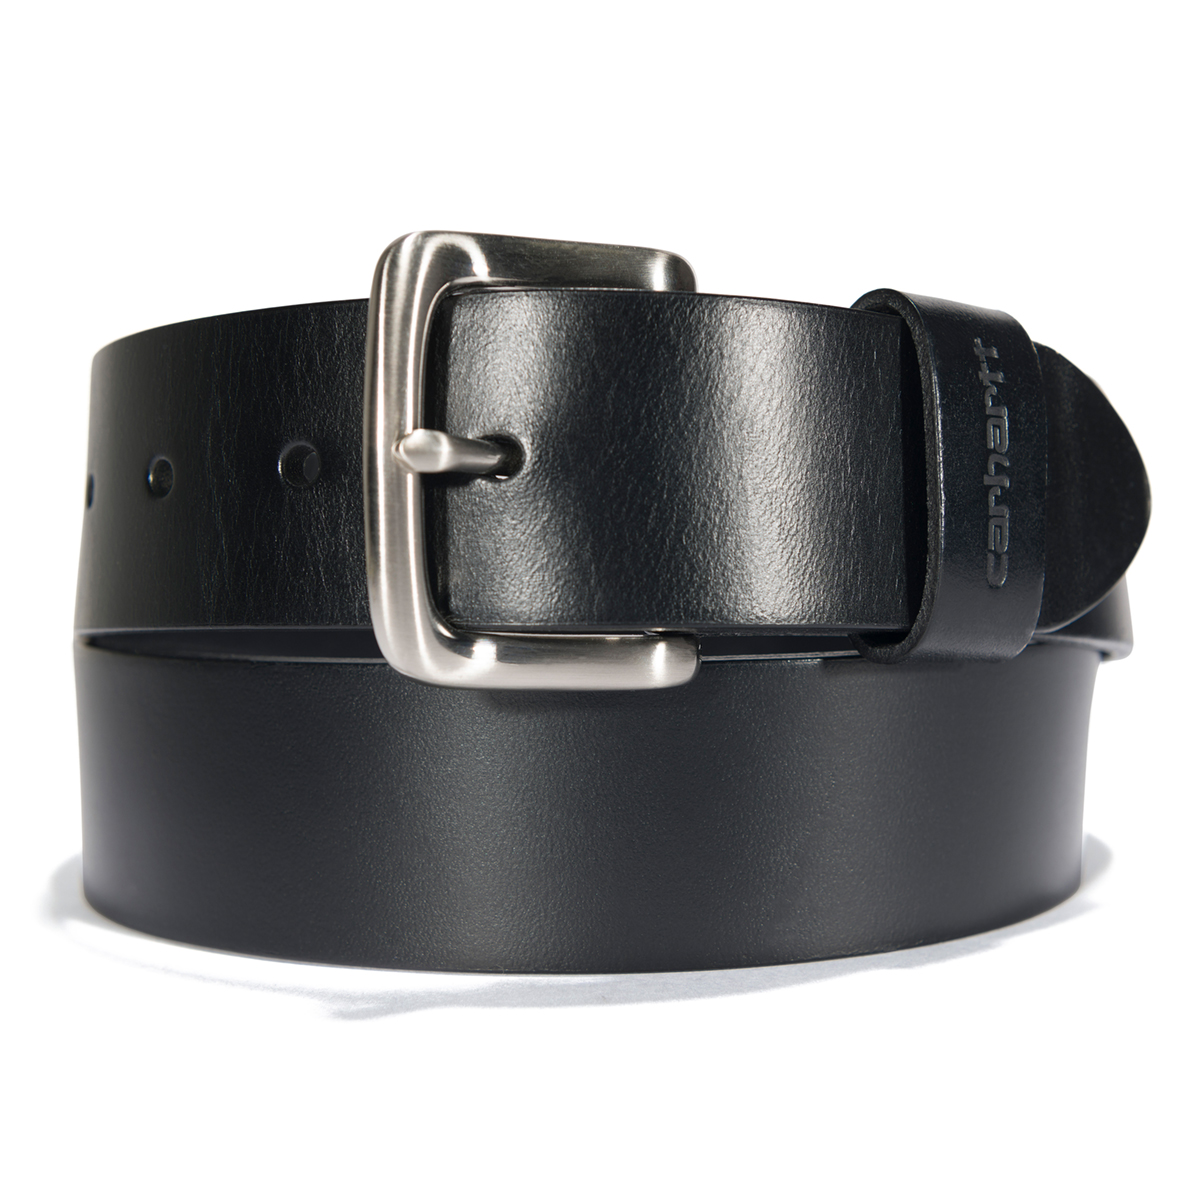 Carhartt® Women's Bridle Leather Classic Buckle Belt Black with Nickel Roller Finish - A000550900